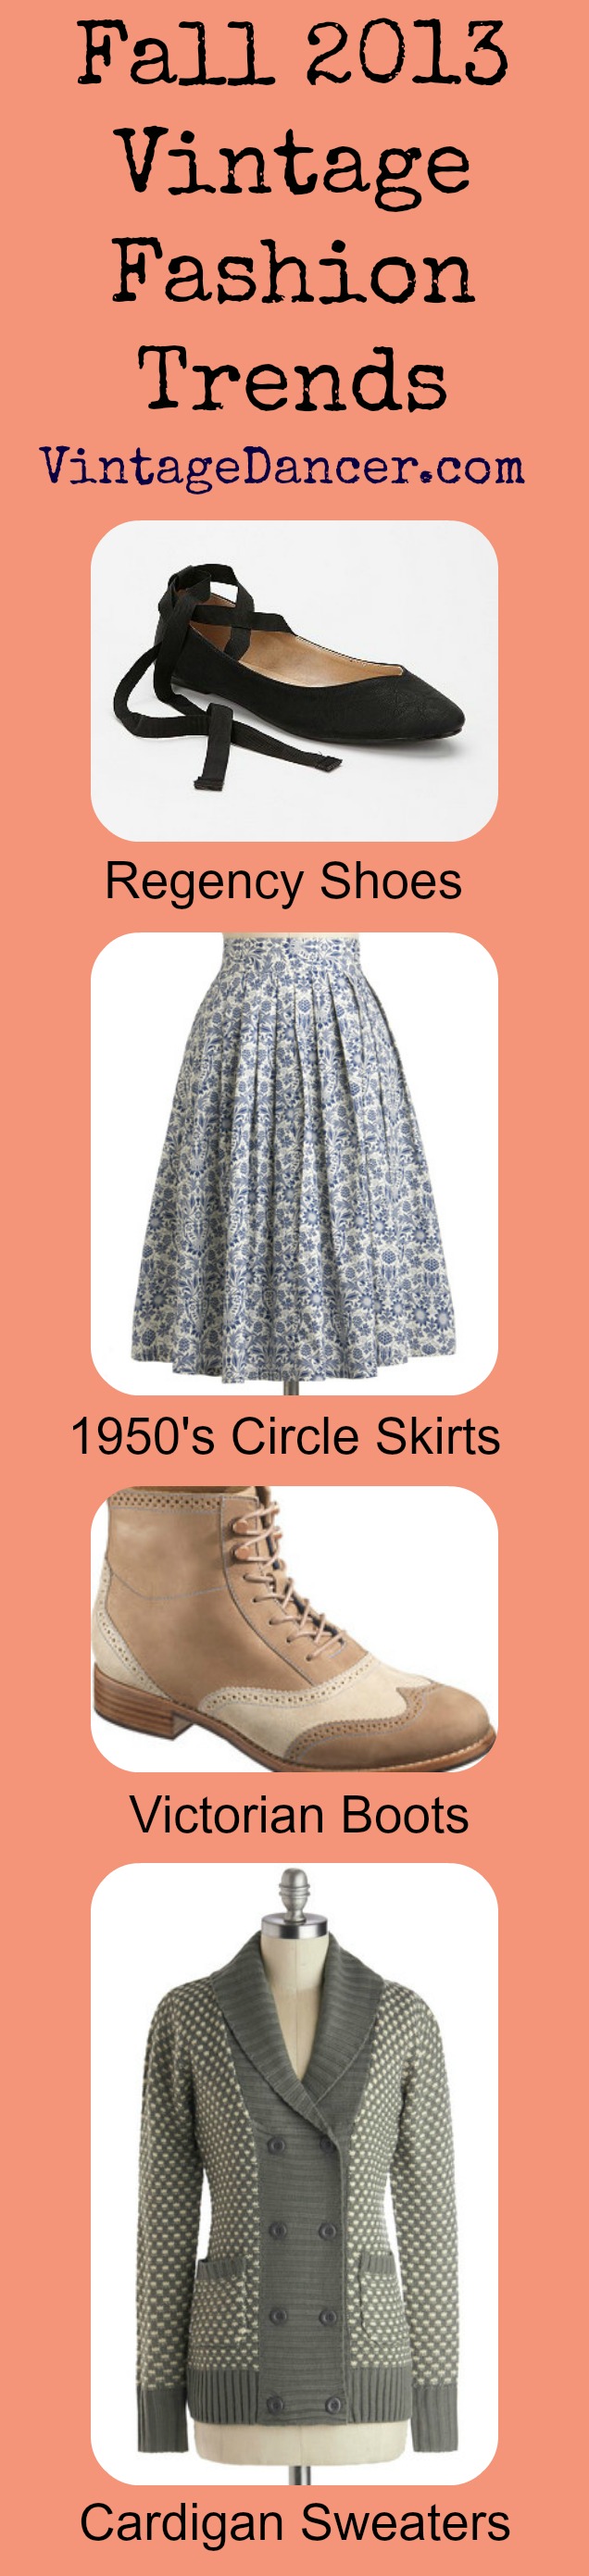 Fall 2013 Vintage Fashion Trends- Circle Skirts, Cardigans, Boots